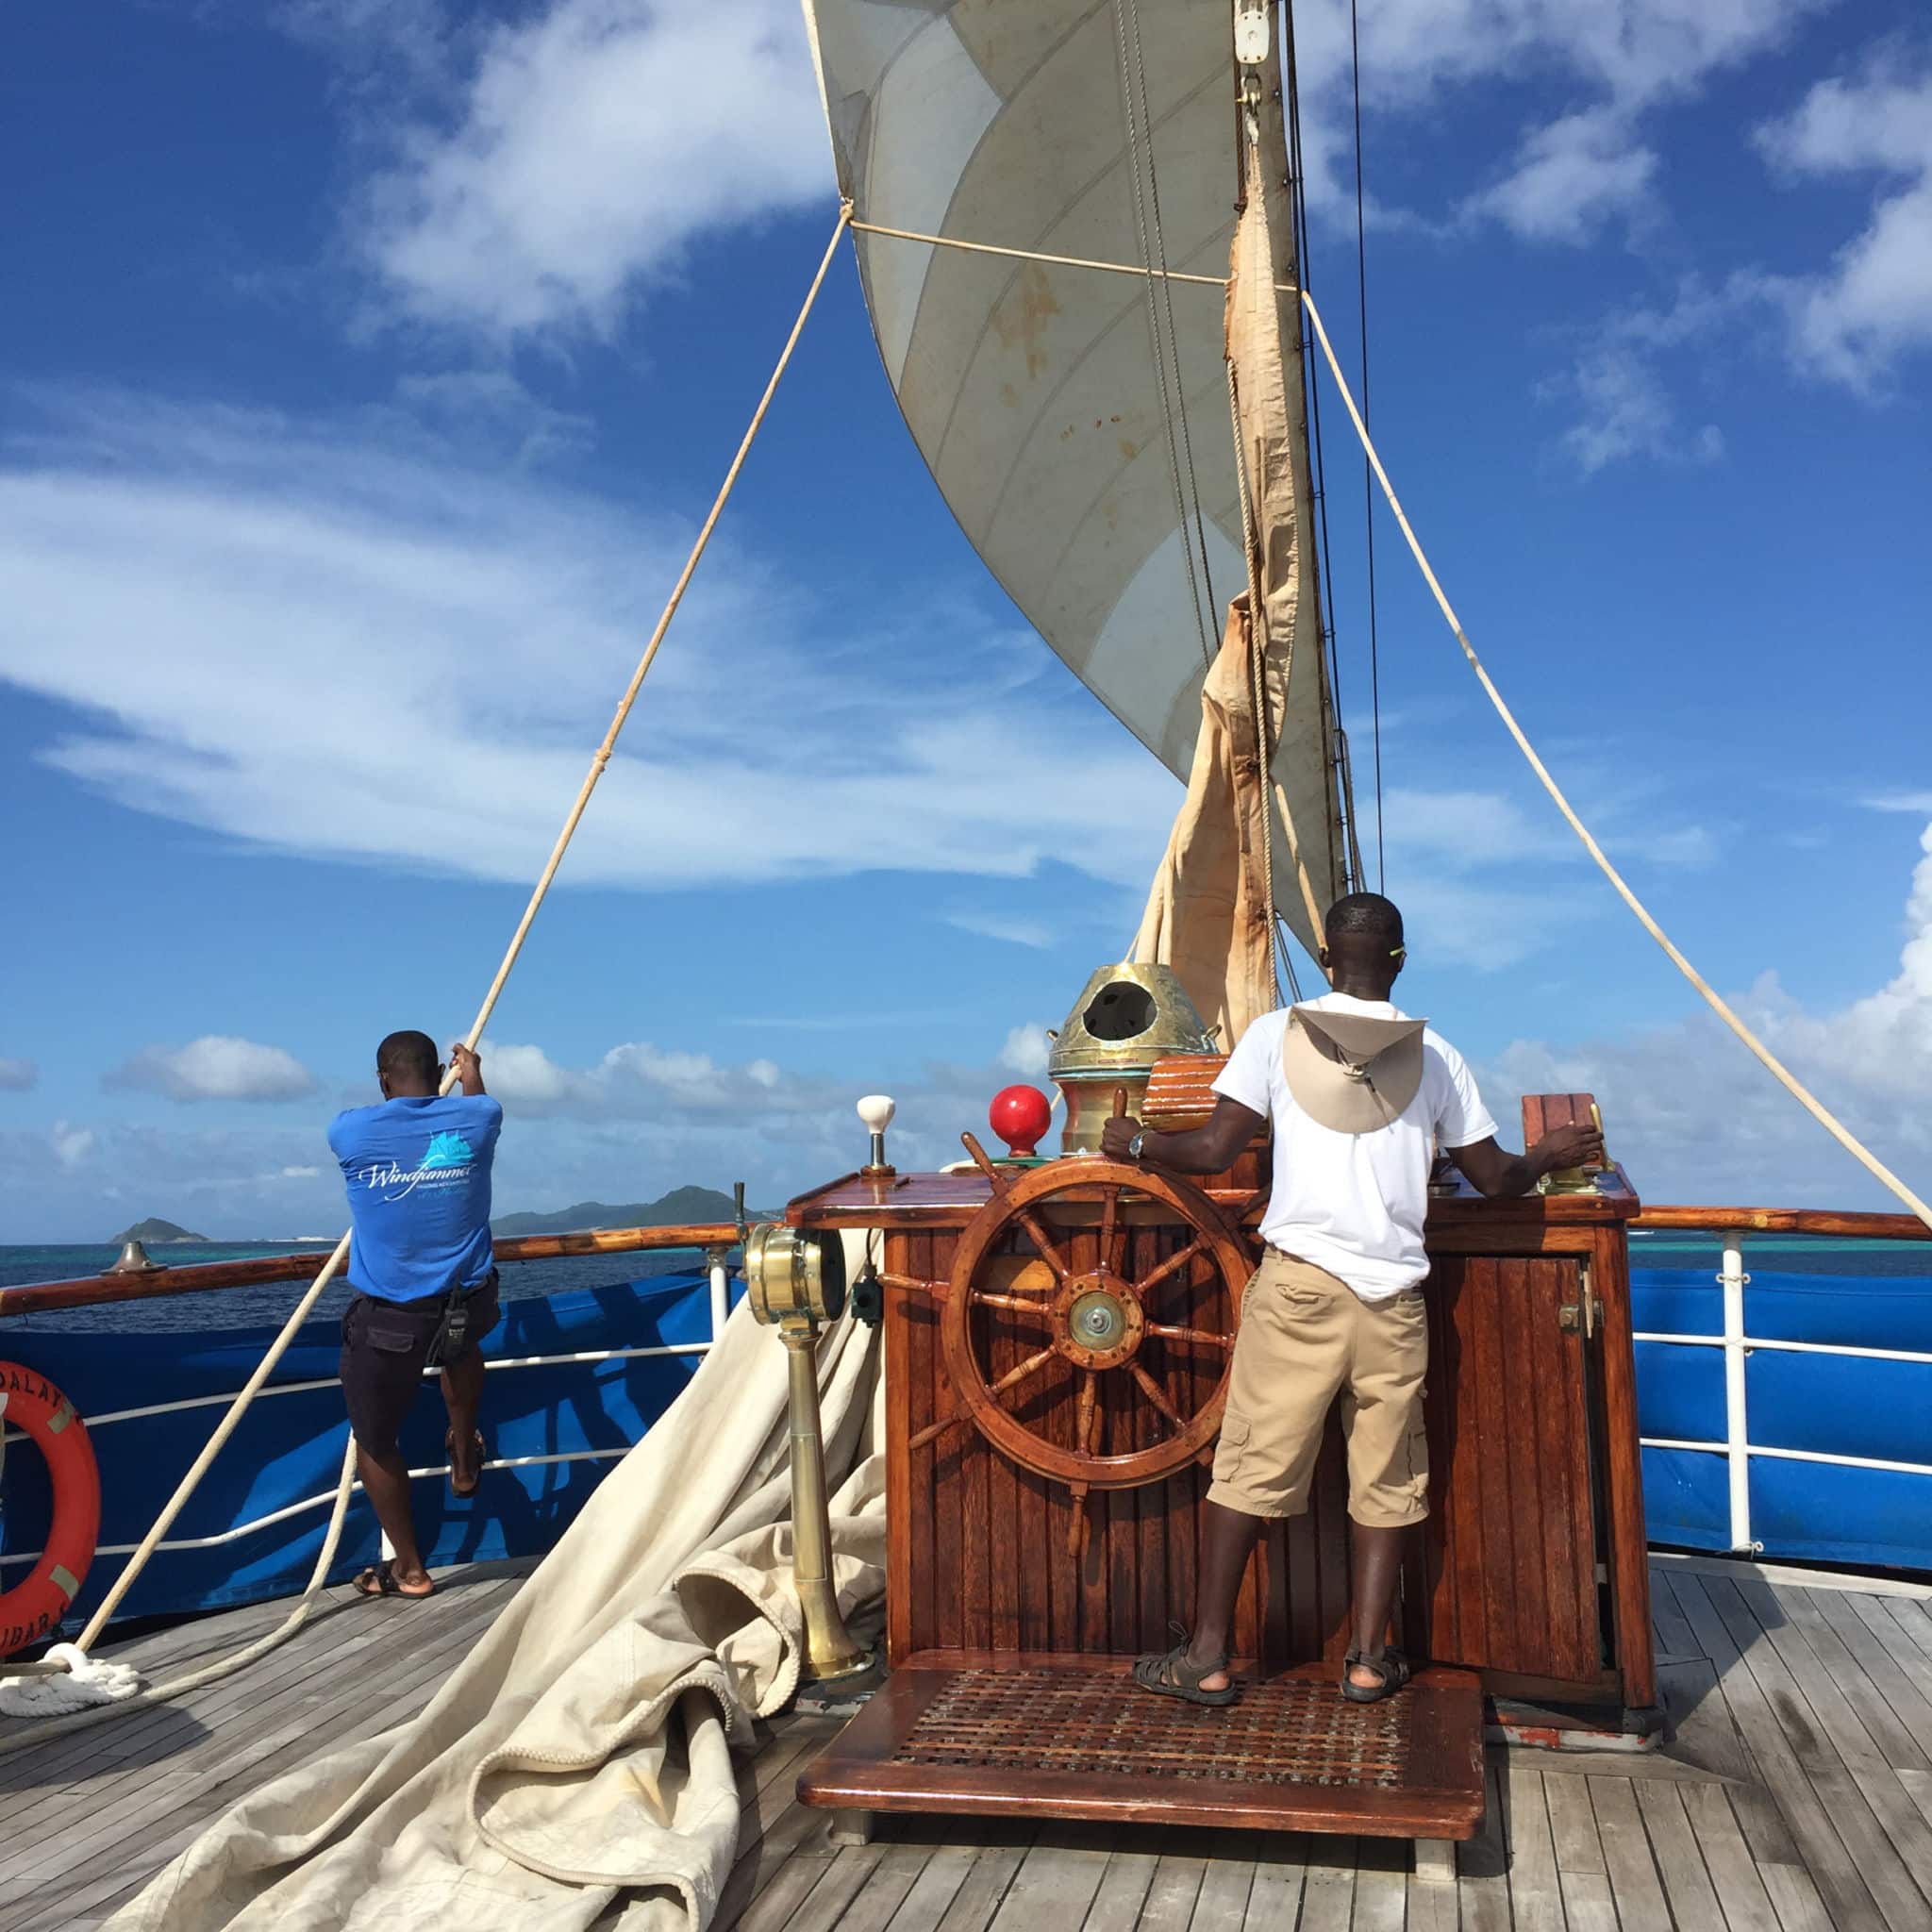 Captain Sly at the helm of the s/v Mandalay